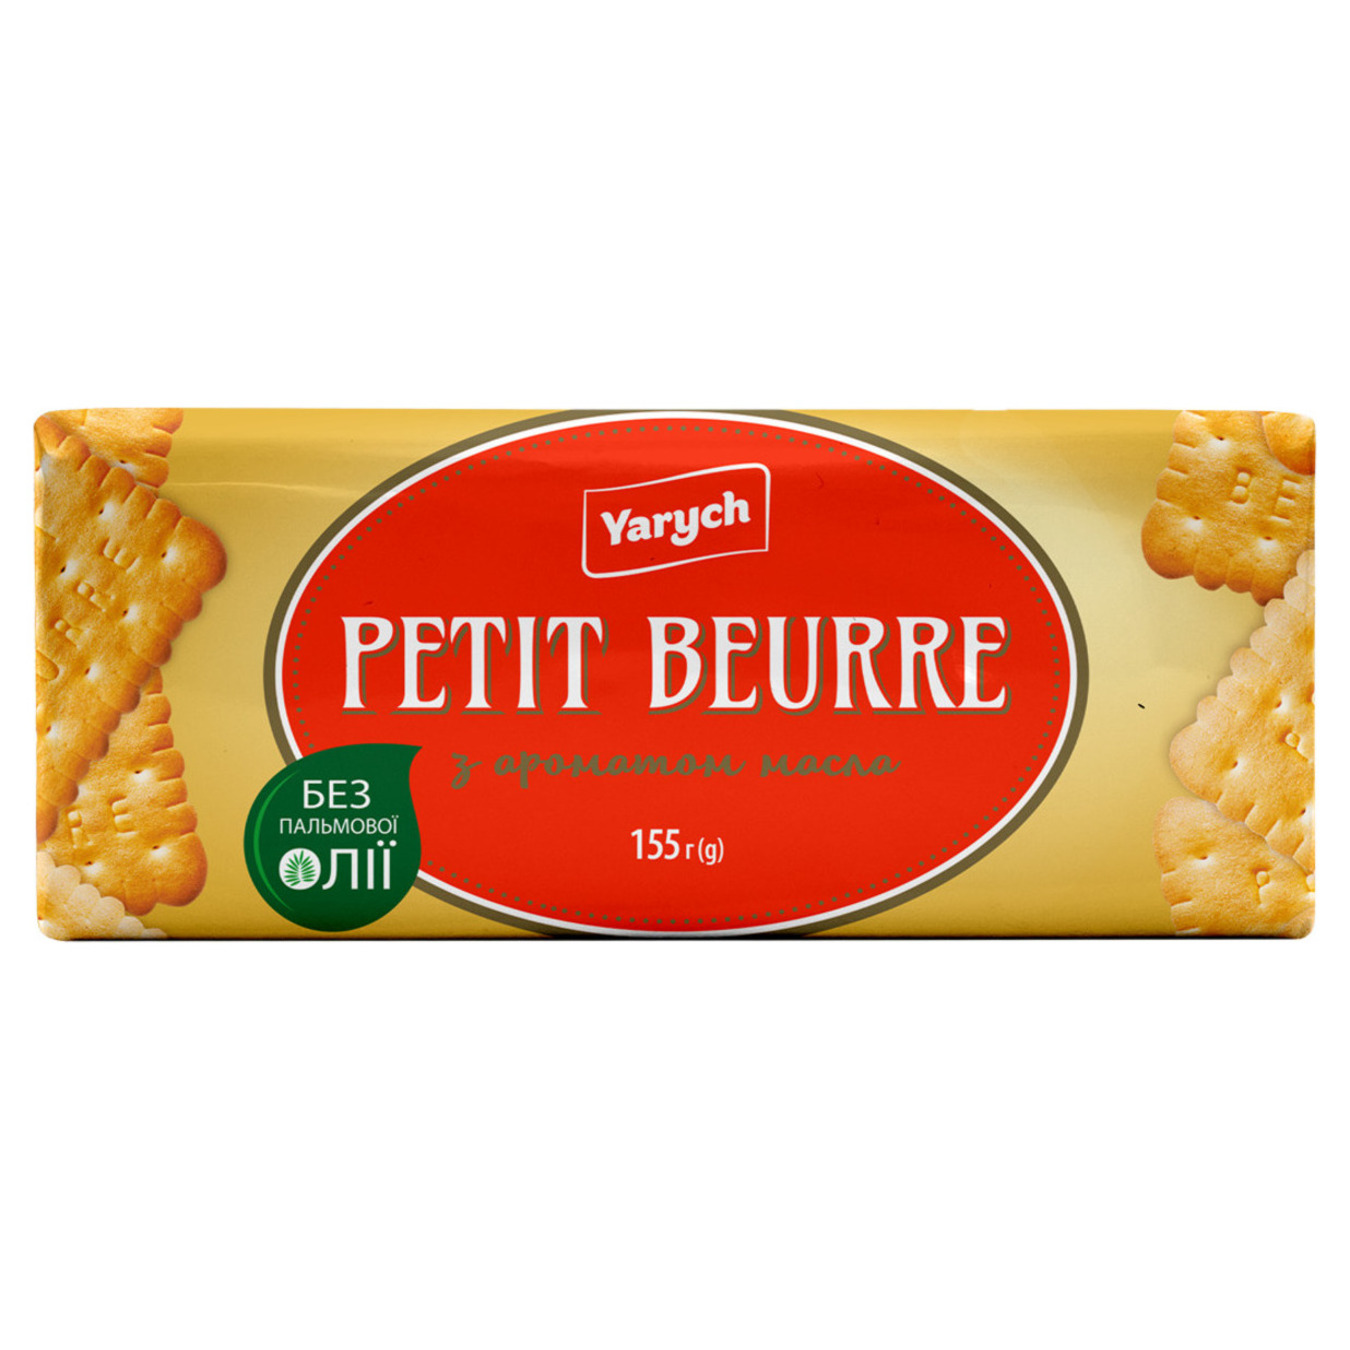 Yarych long petit beurre cookies with butter aroma 155g